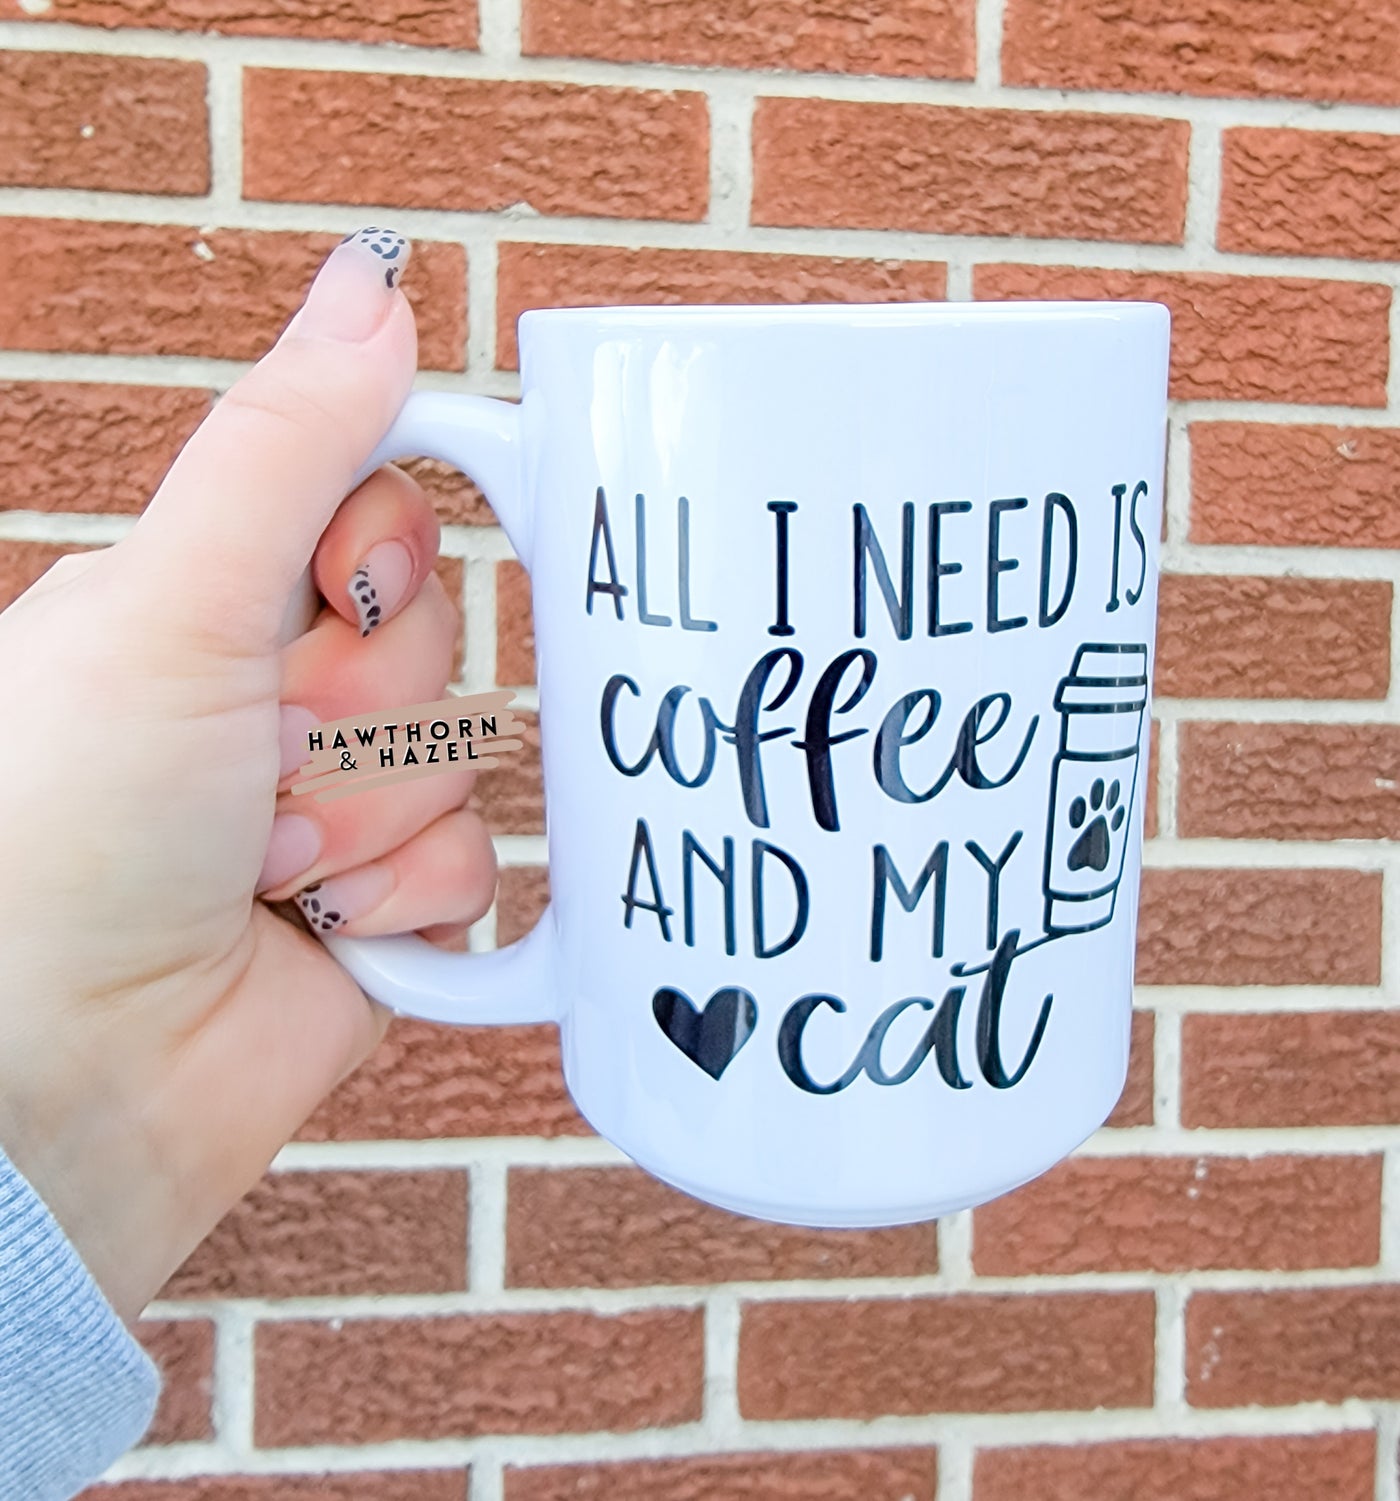 Coffee and cat